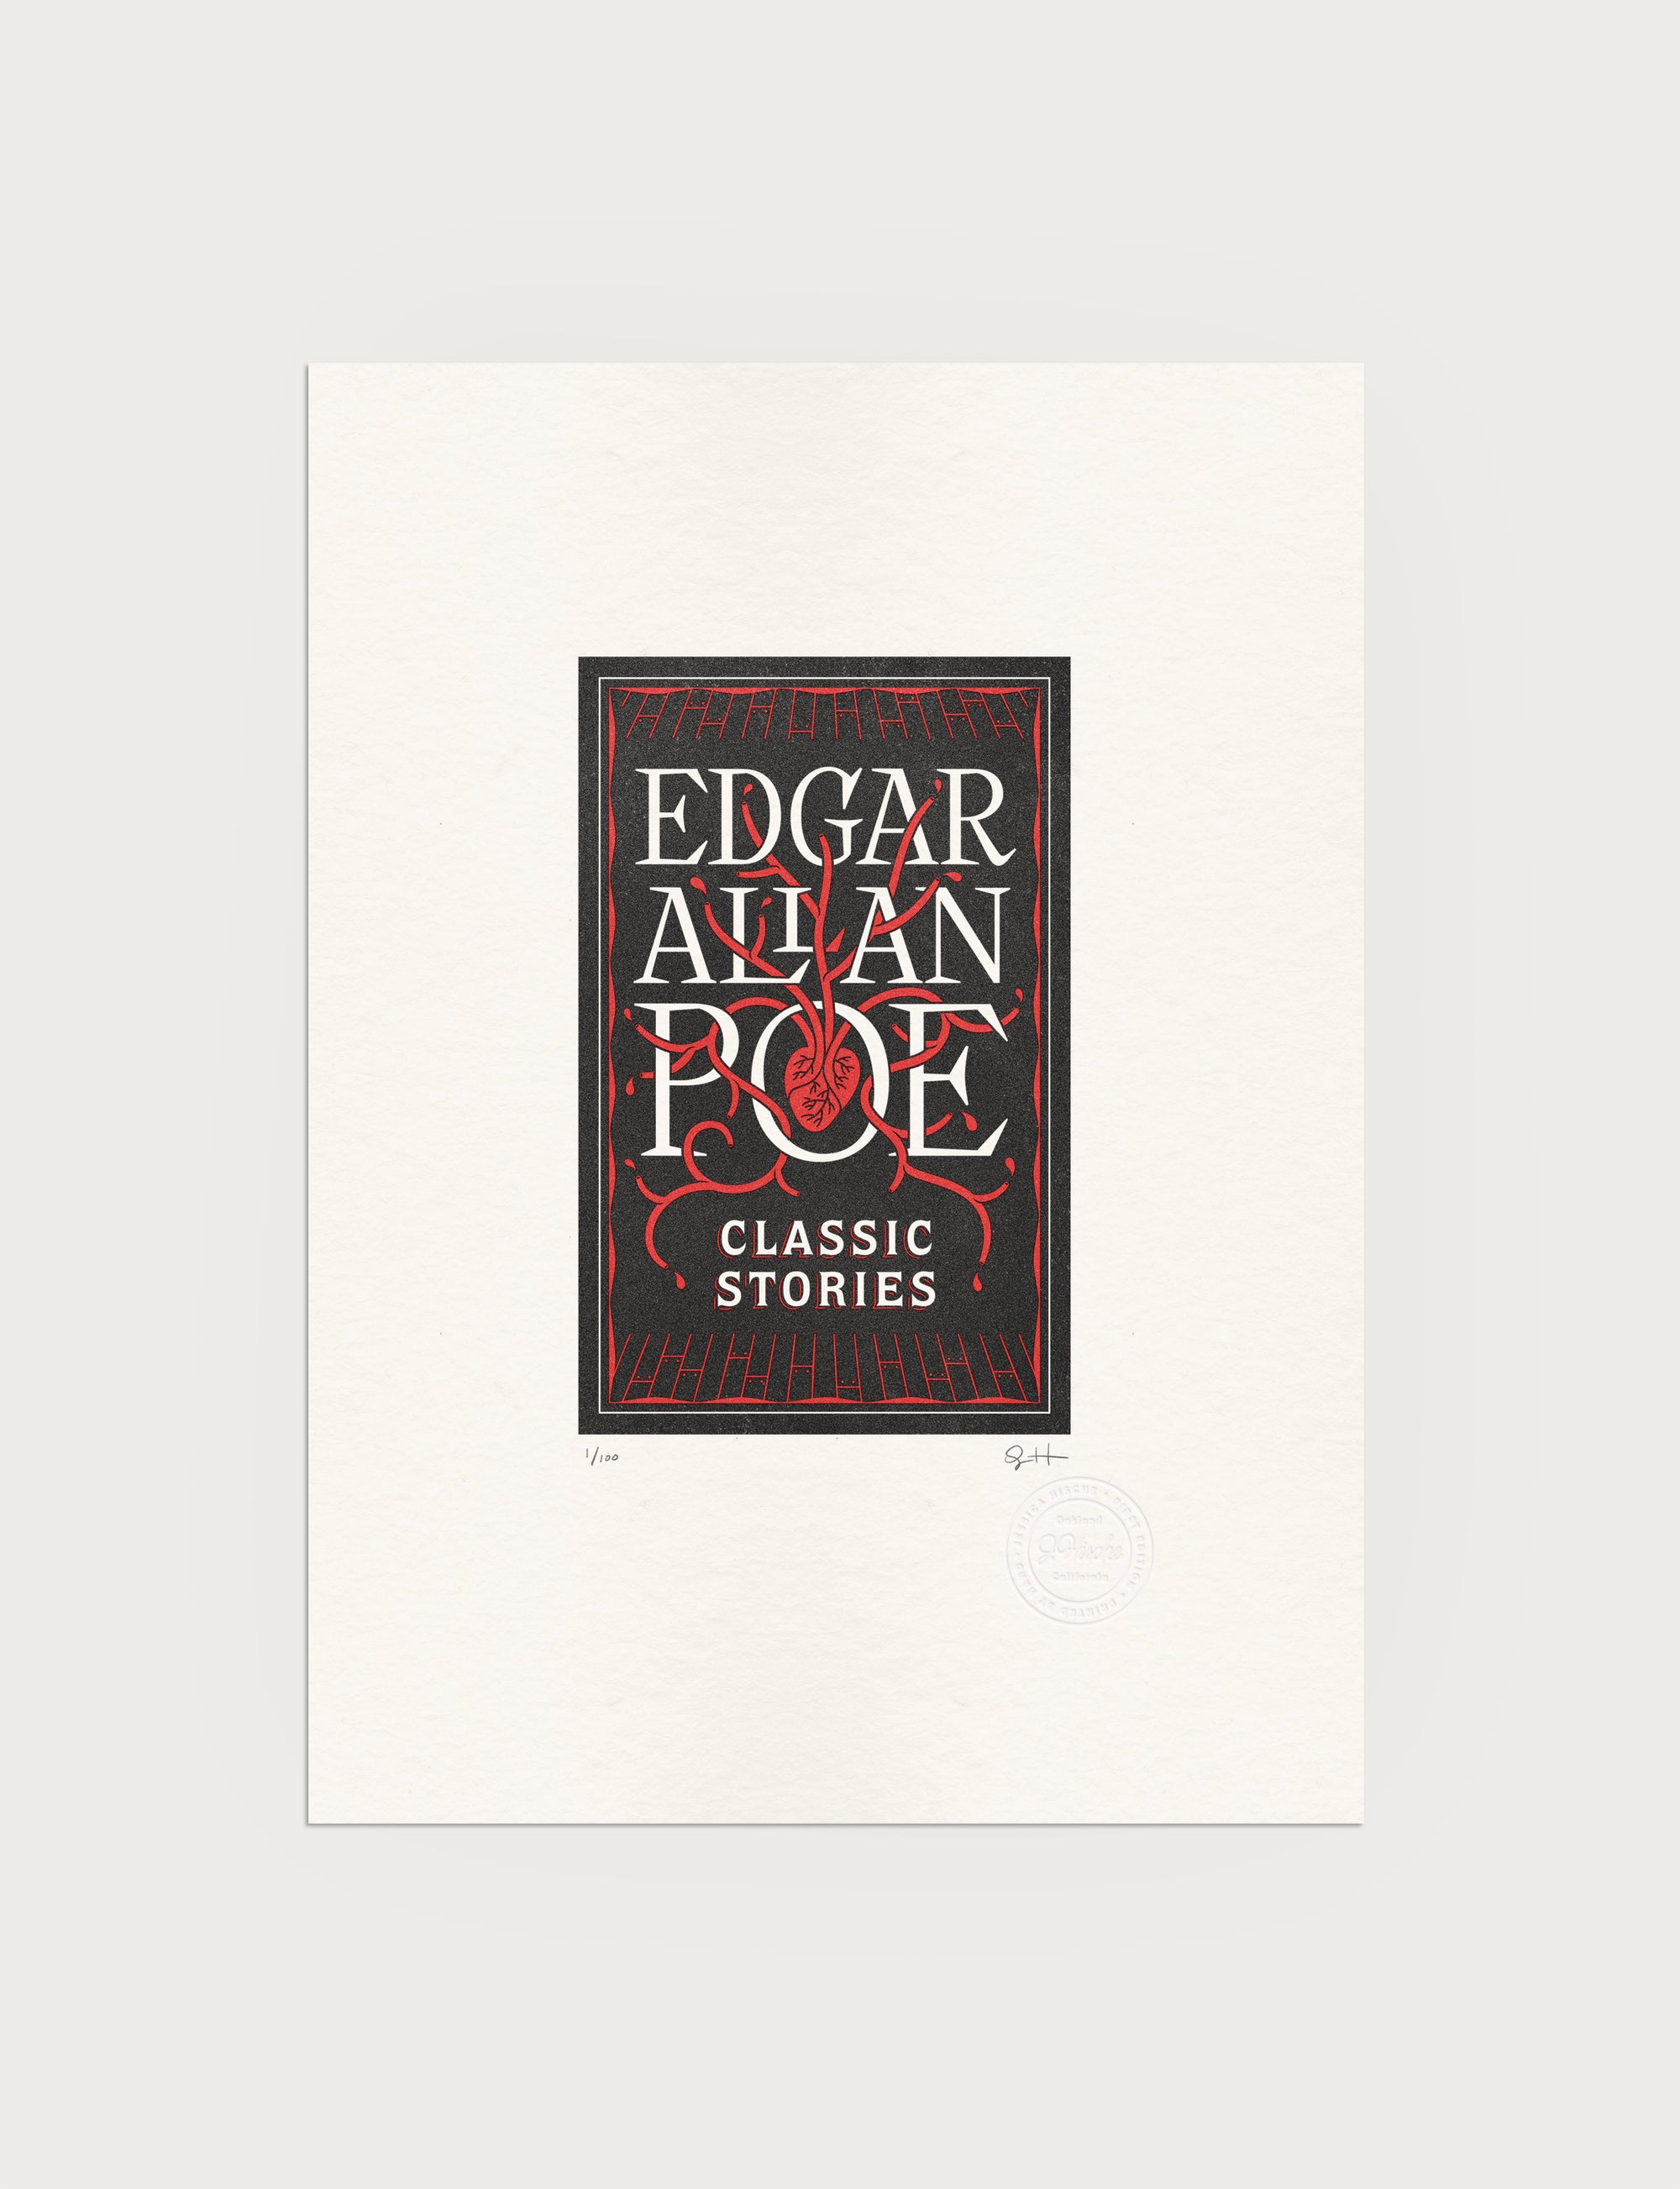 2-color letterpress print in black and red. Printed artwork is an illustrated book cover of Edgar Allan Poe including custom hand lettering.